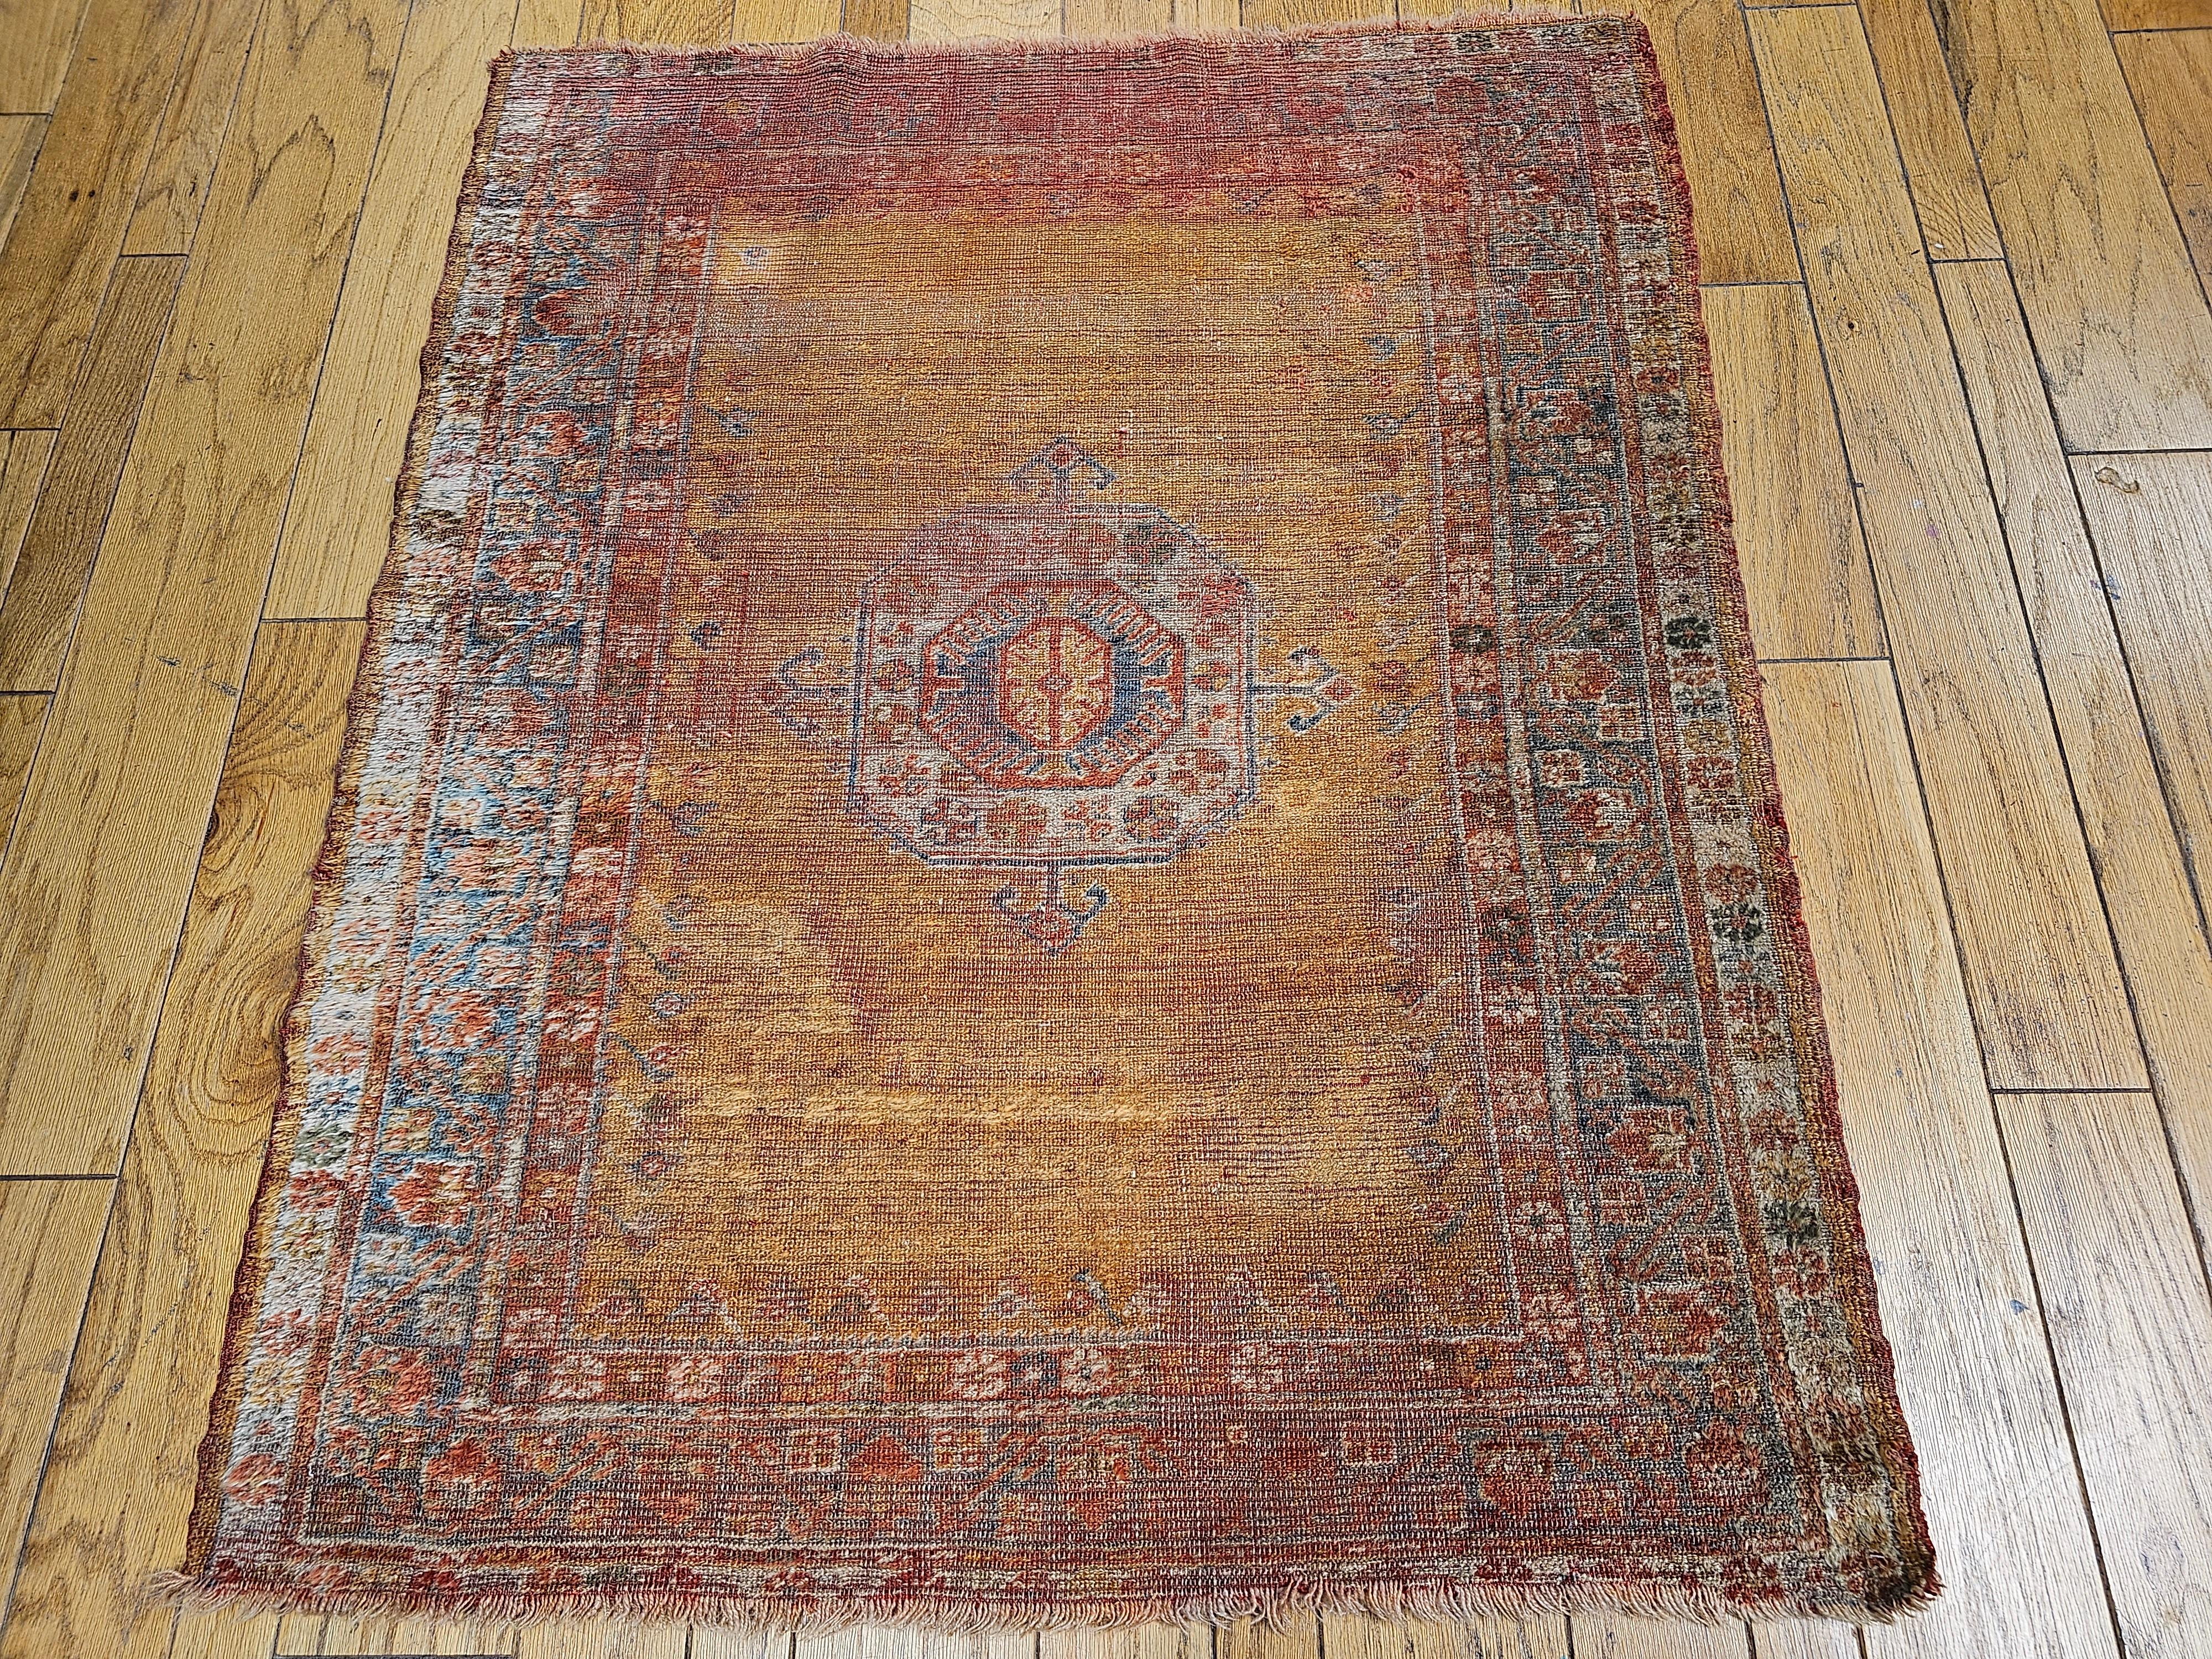 Late 19th Century Turkish Oushak Area Rug in Mamluk Pattern in Saffron, Teal For Sale 5